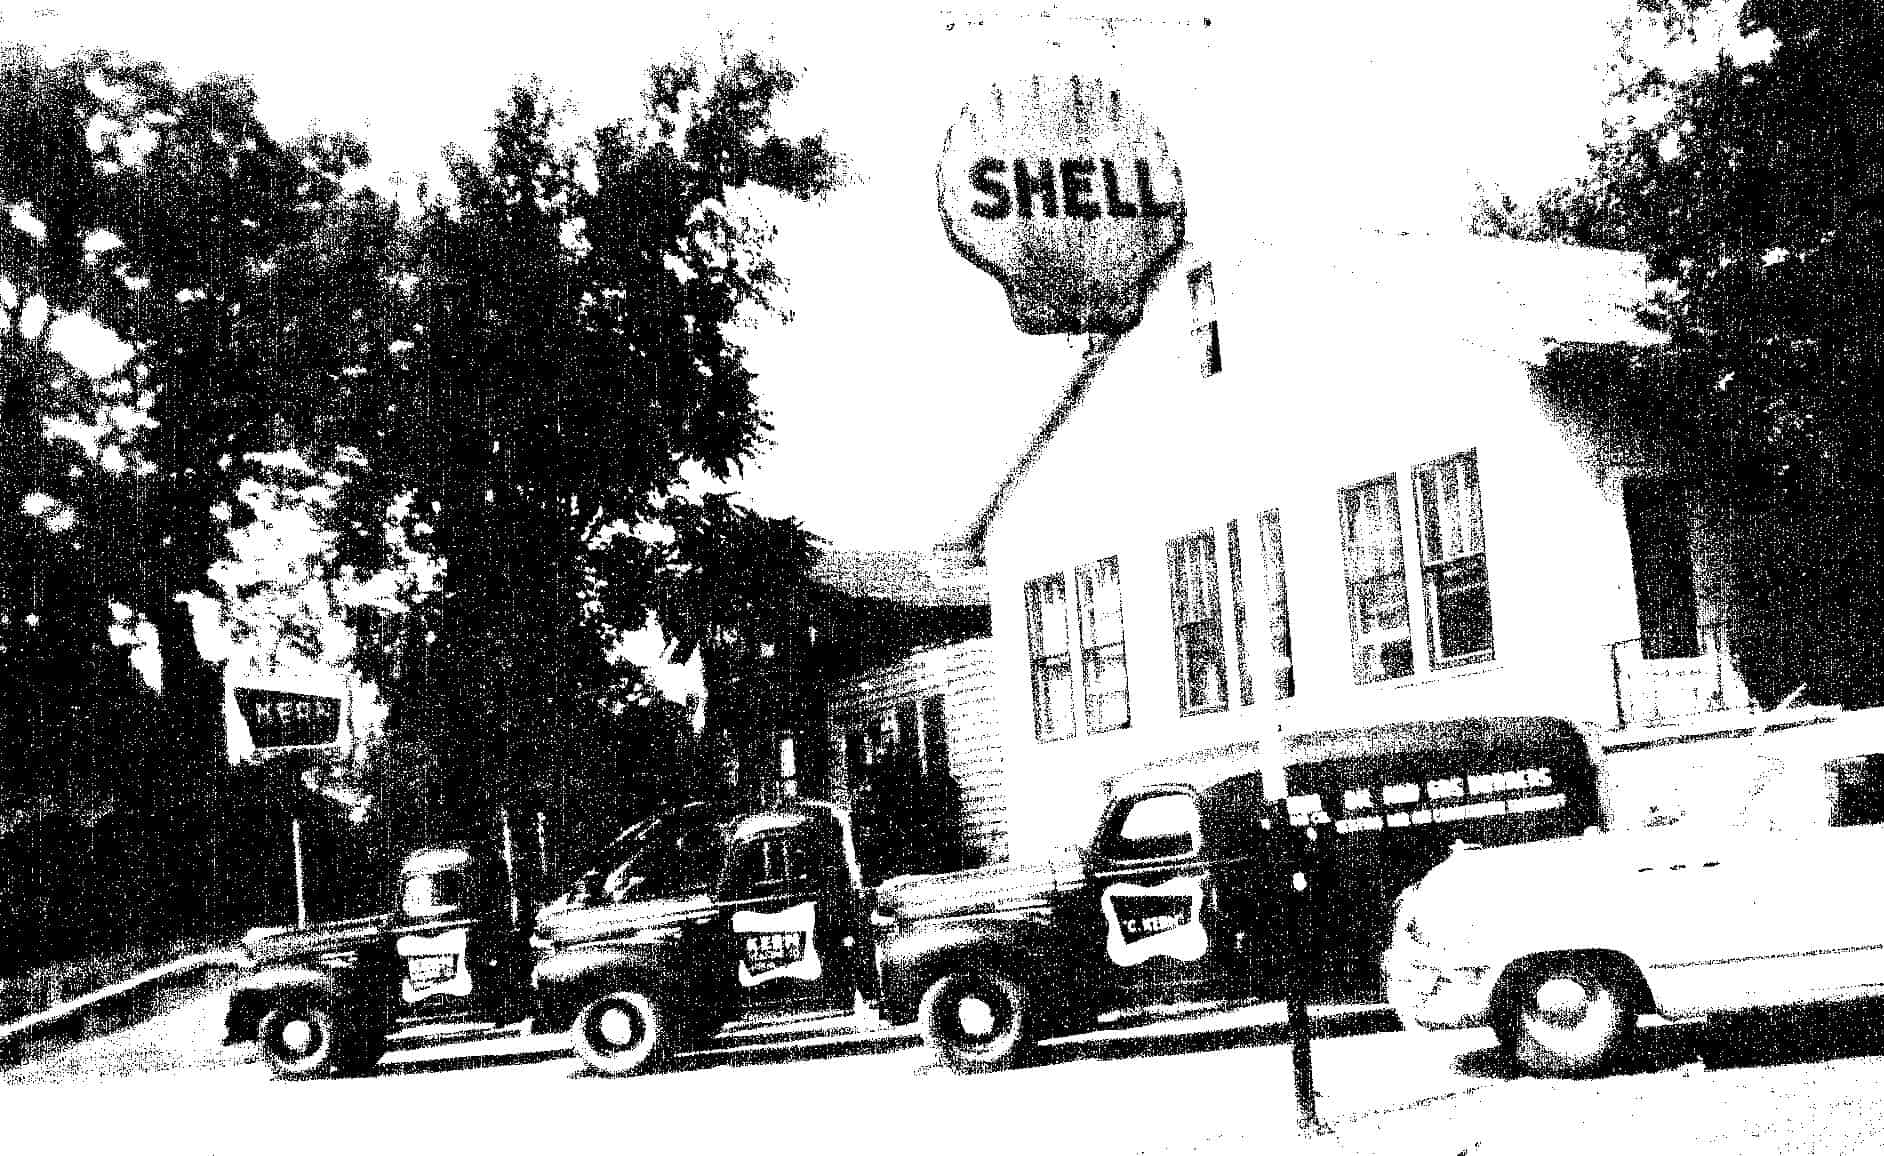 1936 Photo of Kern Hearing & Cooling Co. Business